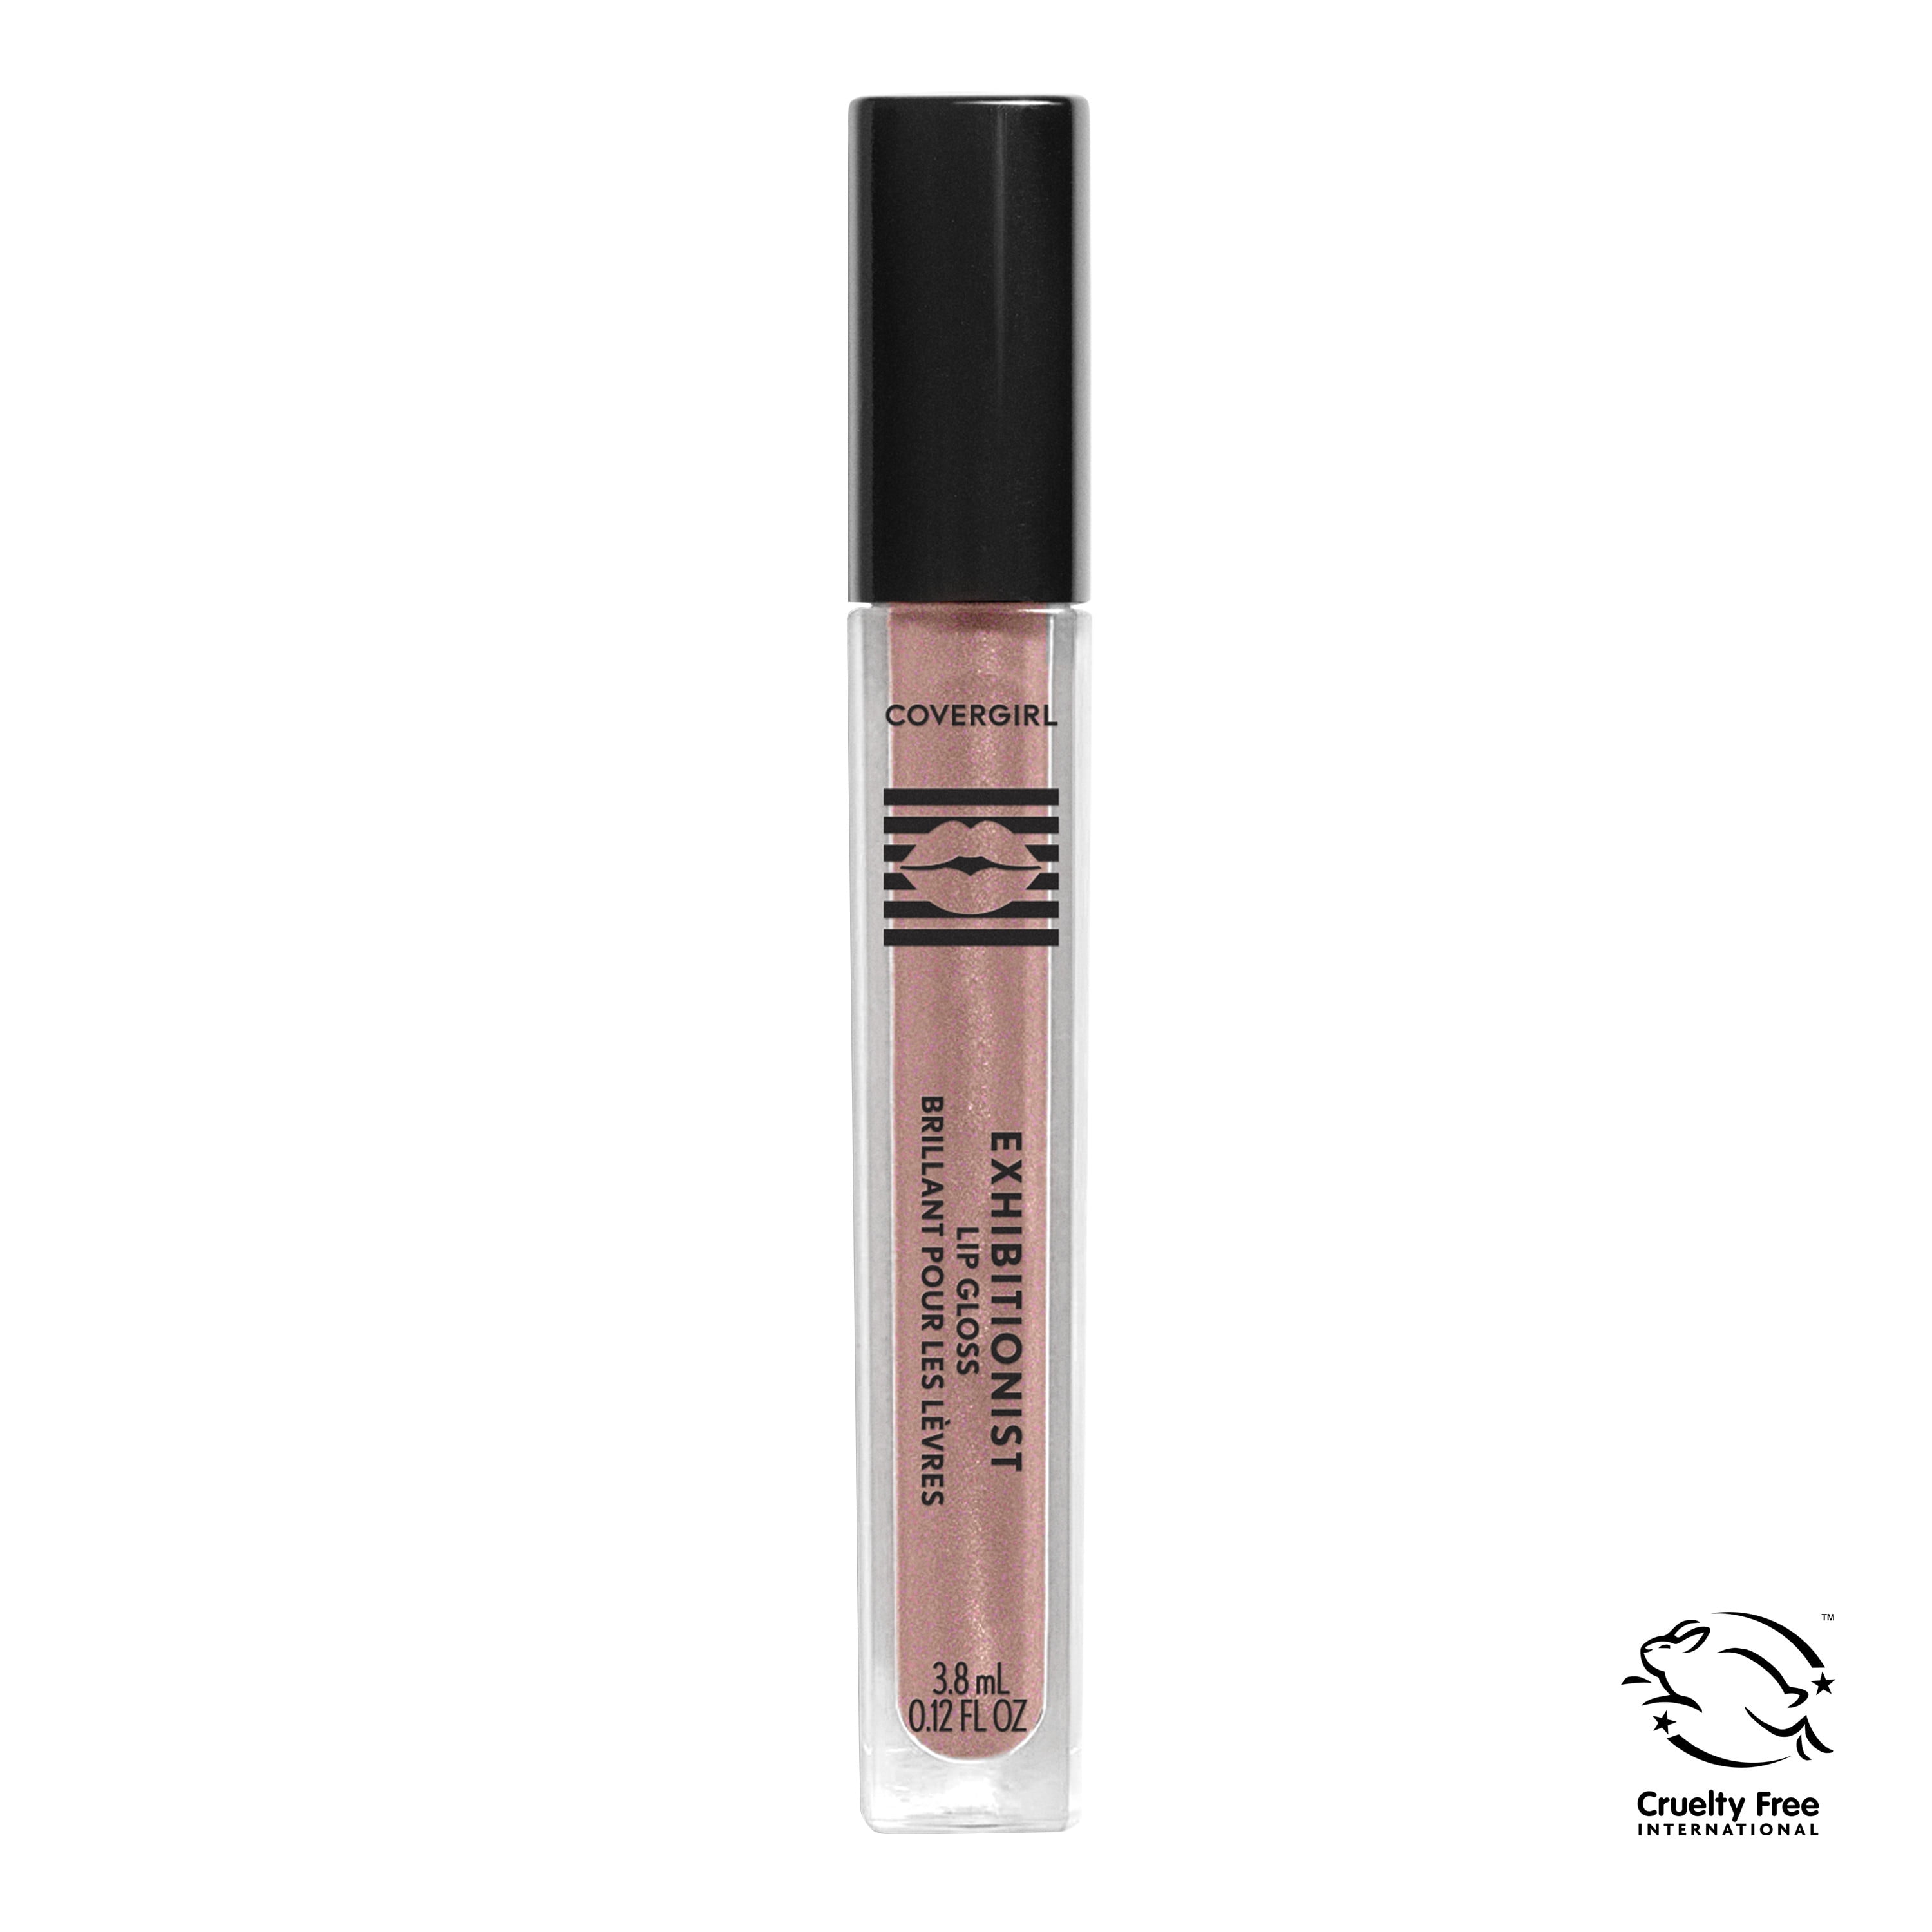 COVERGIRL Exhibitionist Lip Gloss, Adulting, 0.12 oz, Lip Gloss, Shiny Lip Gloss, Pink Lip Gloss, Moisturizing Lip Gloss, Intense Hydration, Vibrant, Luscious